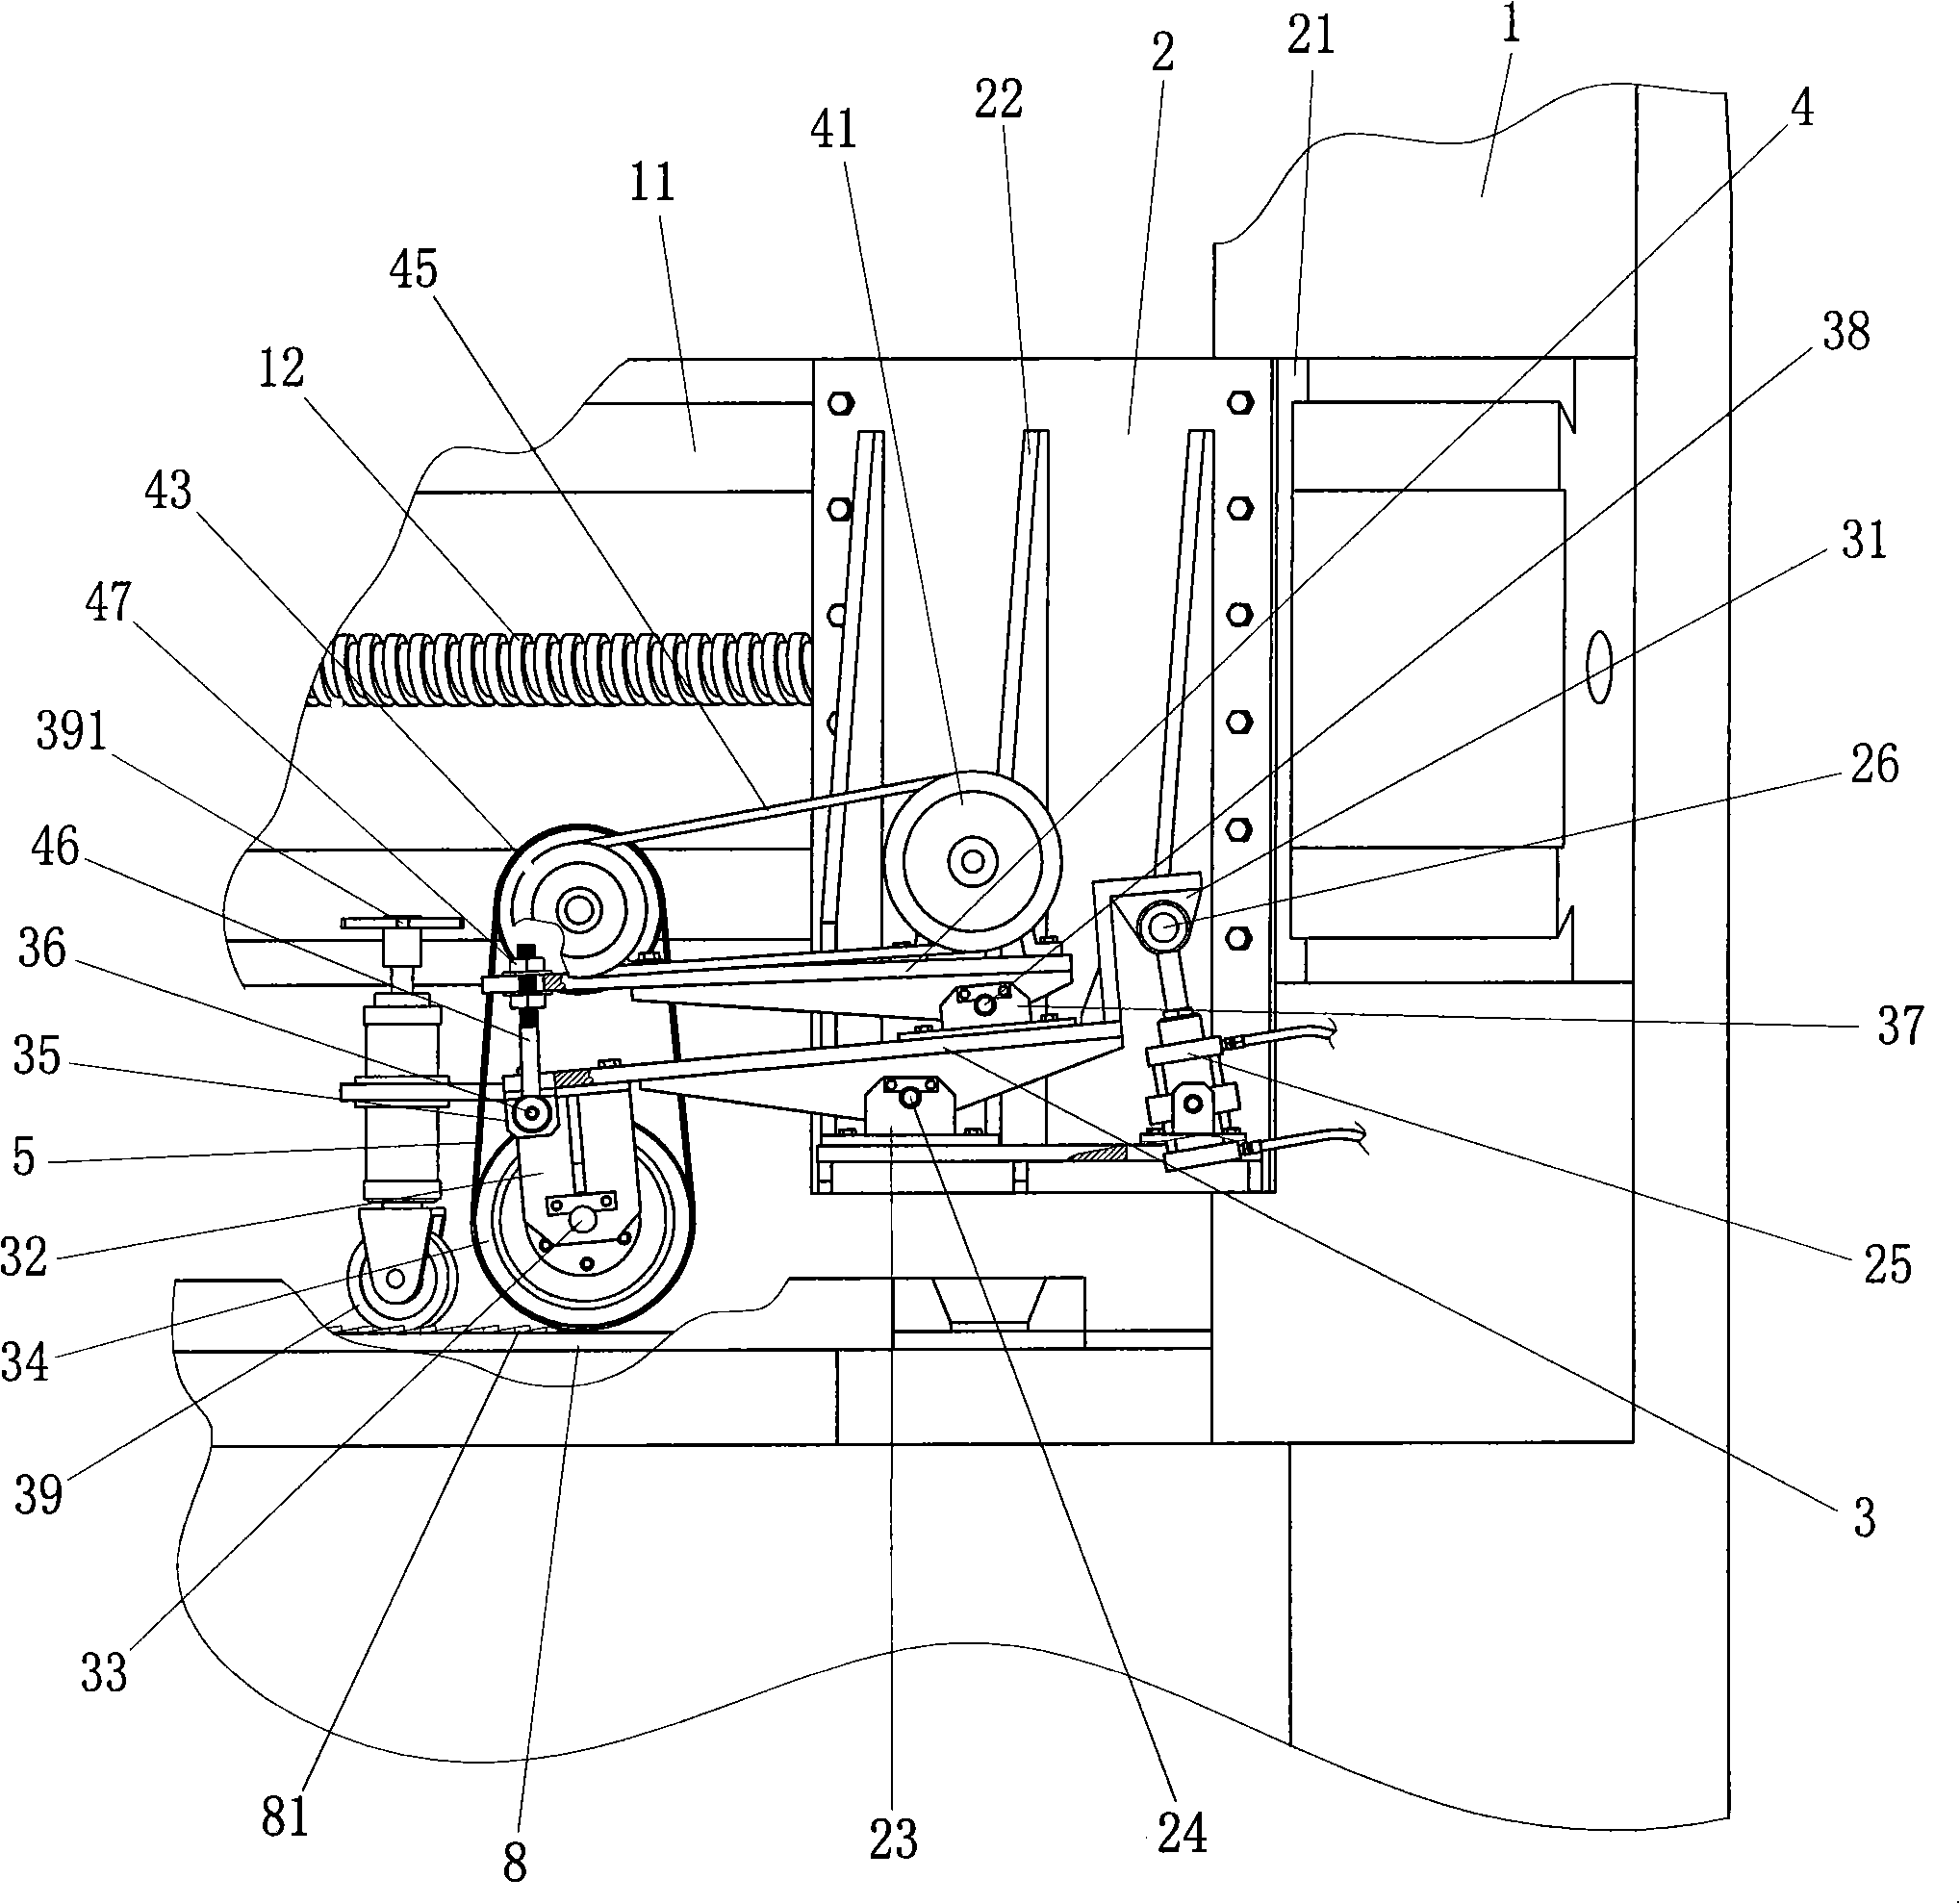 Butt-welding weld joint automatic coping device